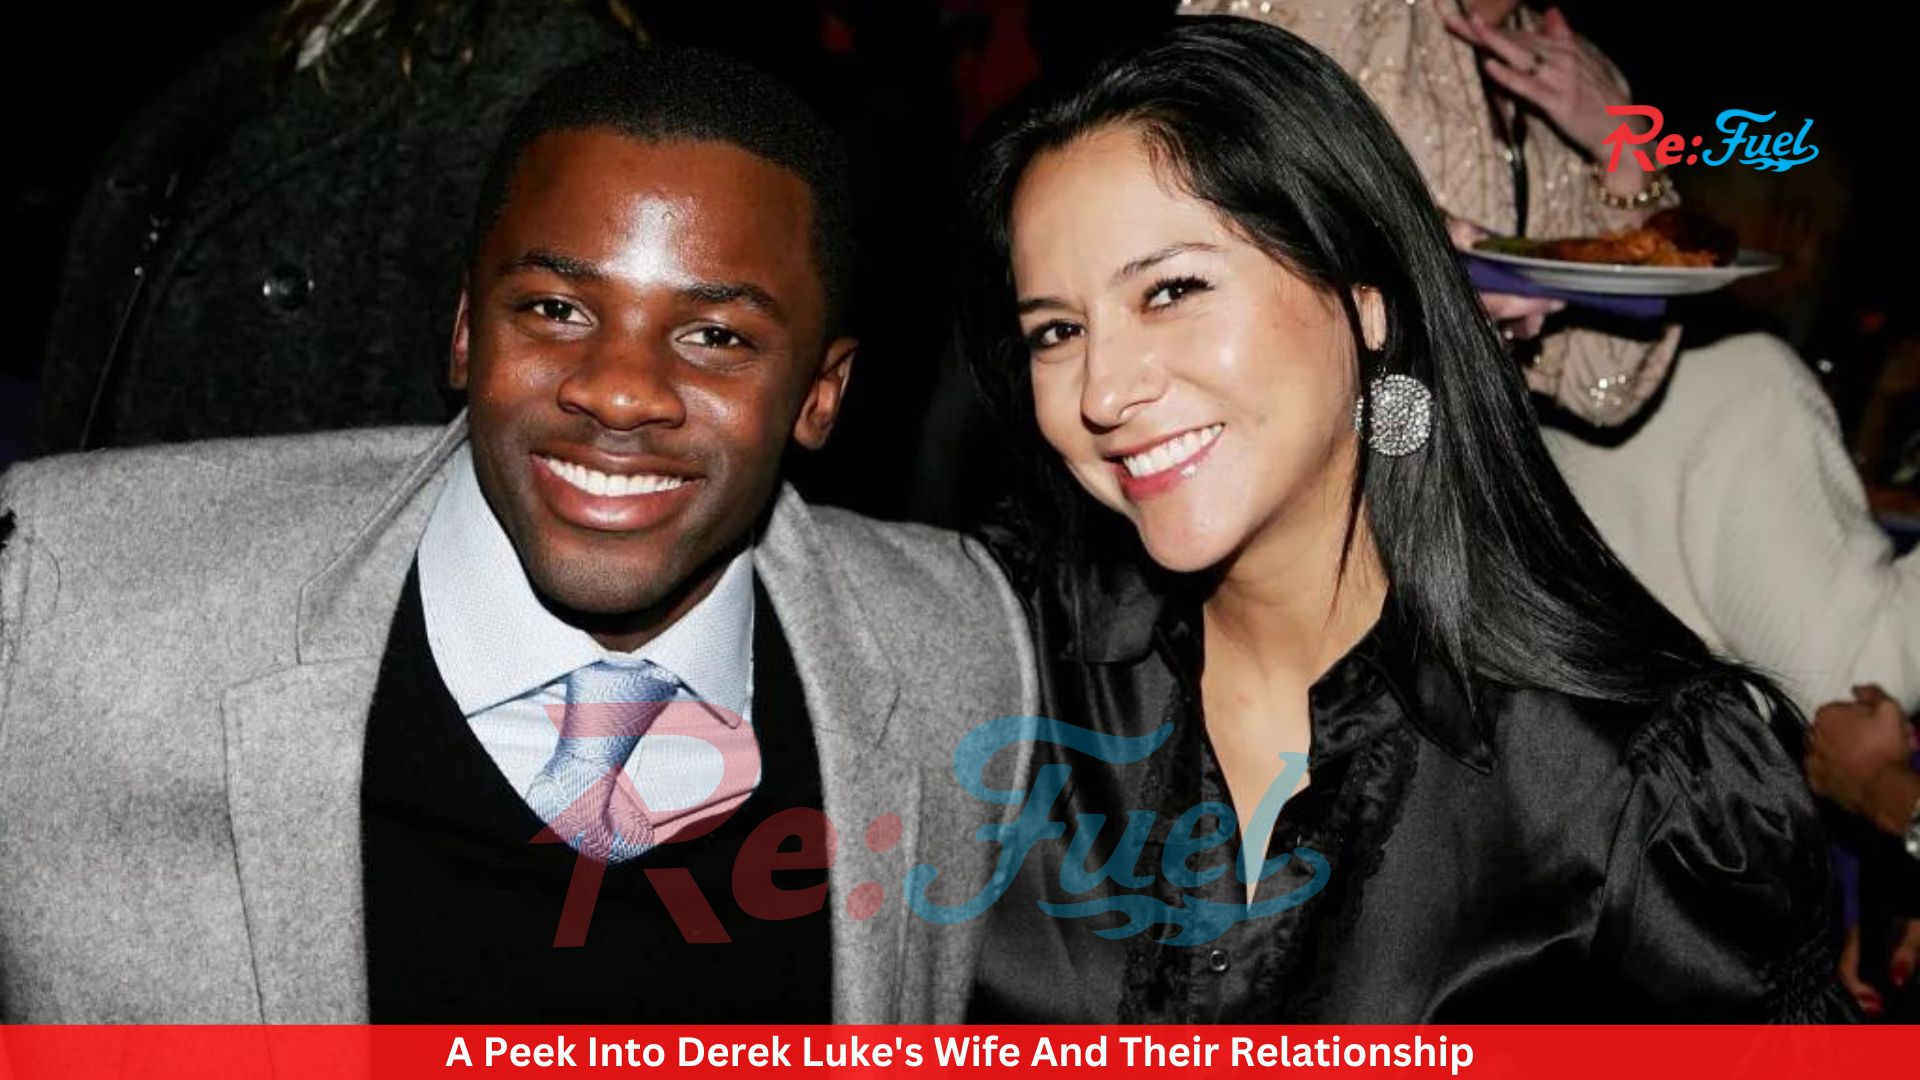 A Peek Into Derek Luke's Wife And Their Relationship